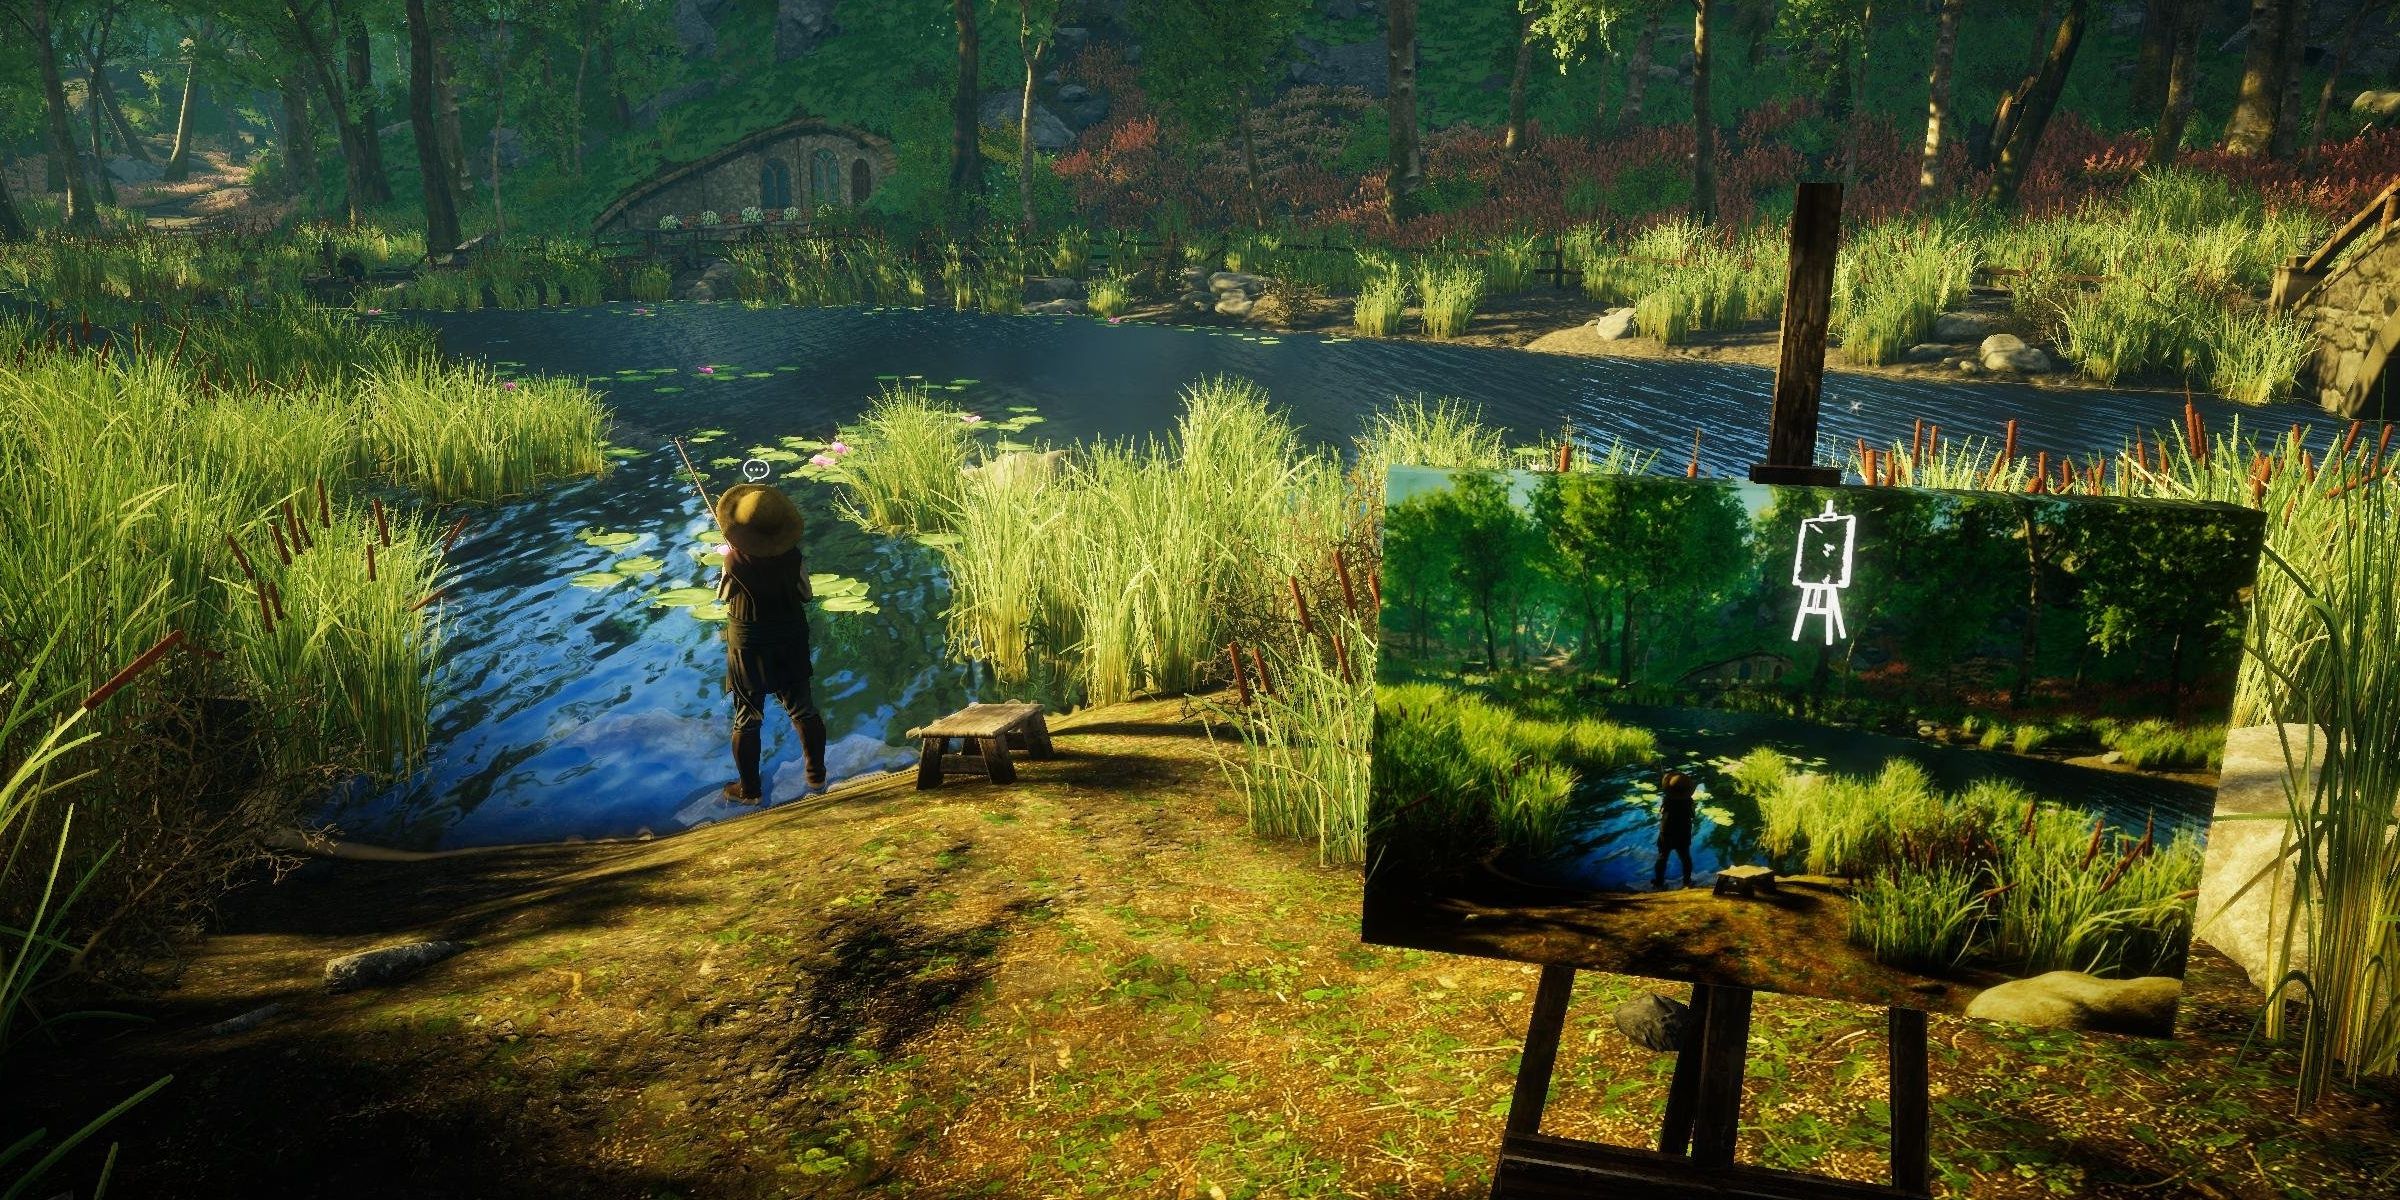 painting in nature